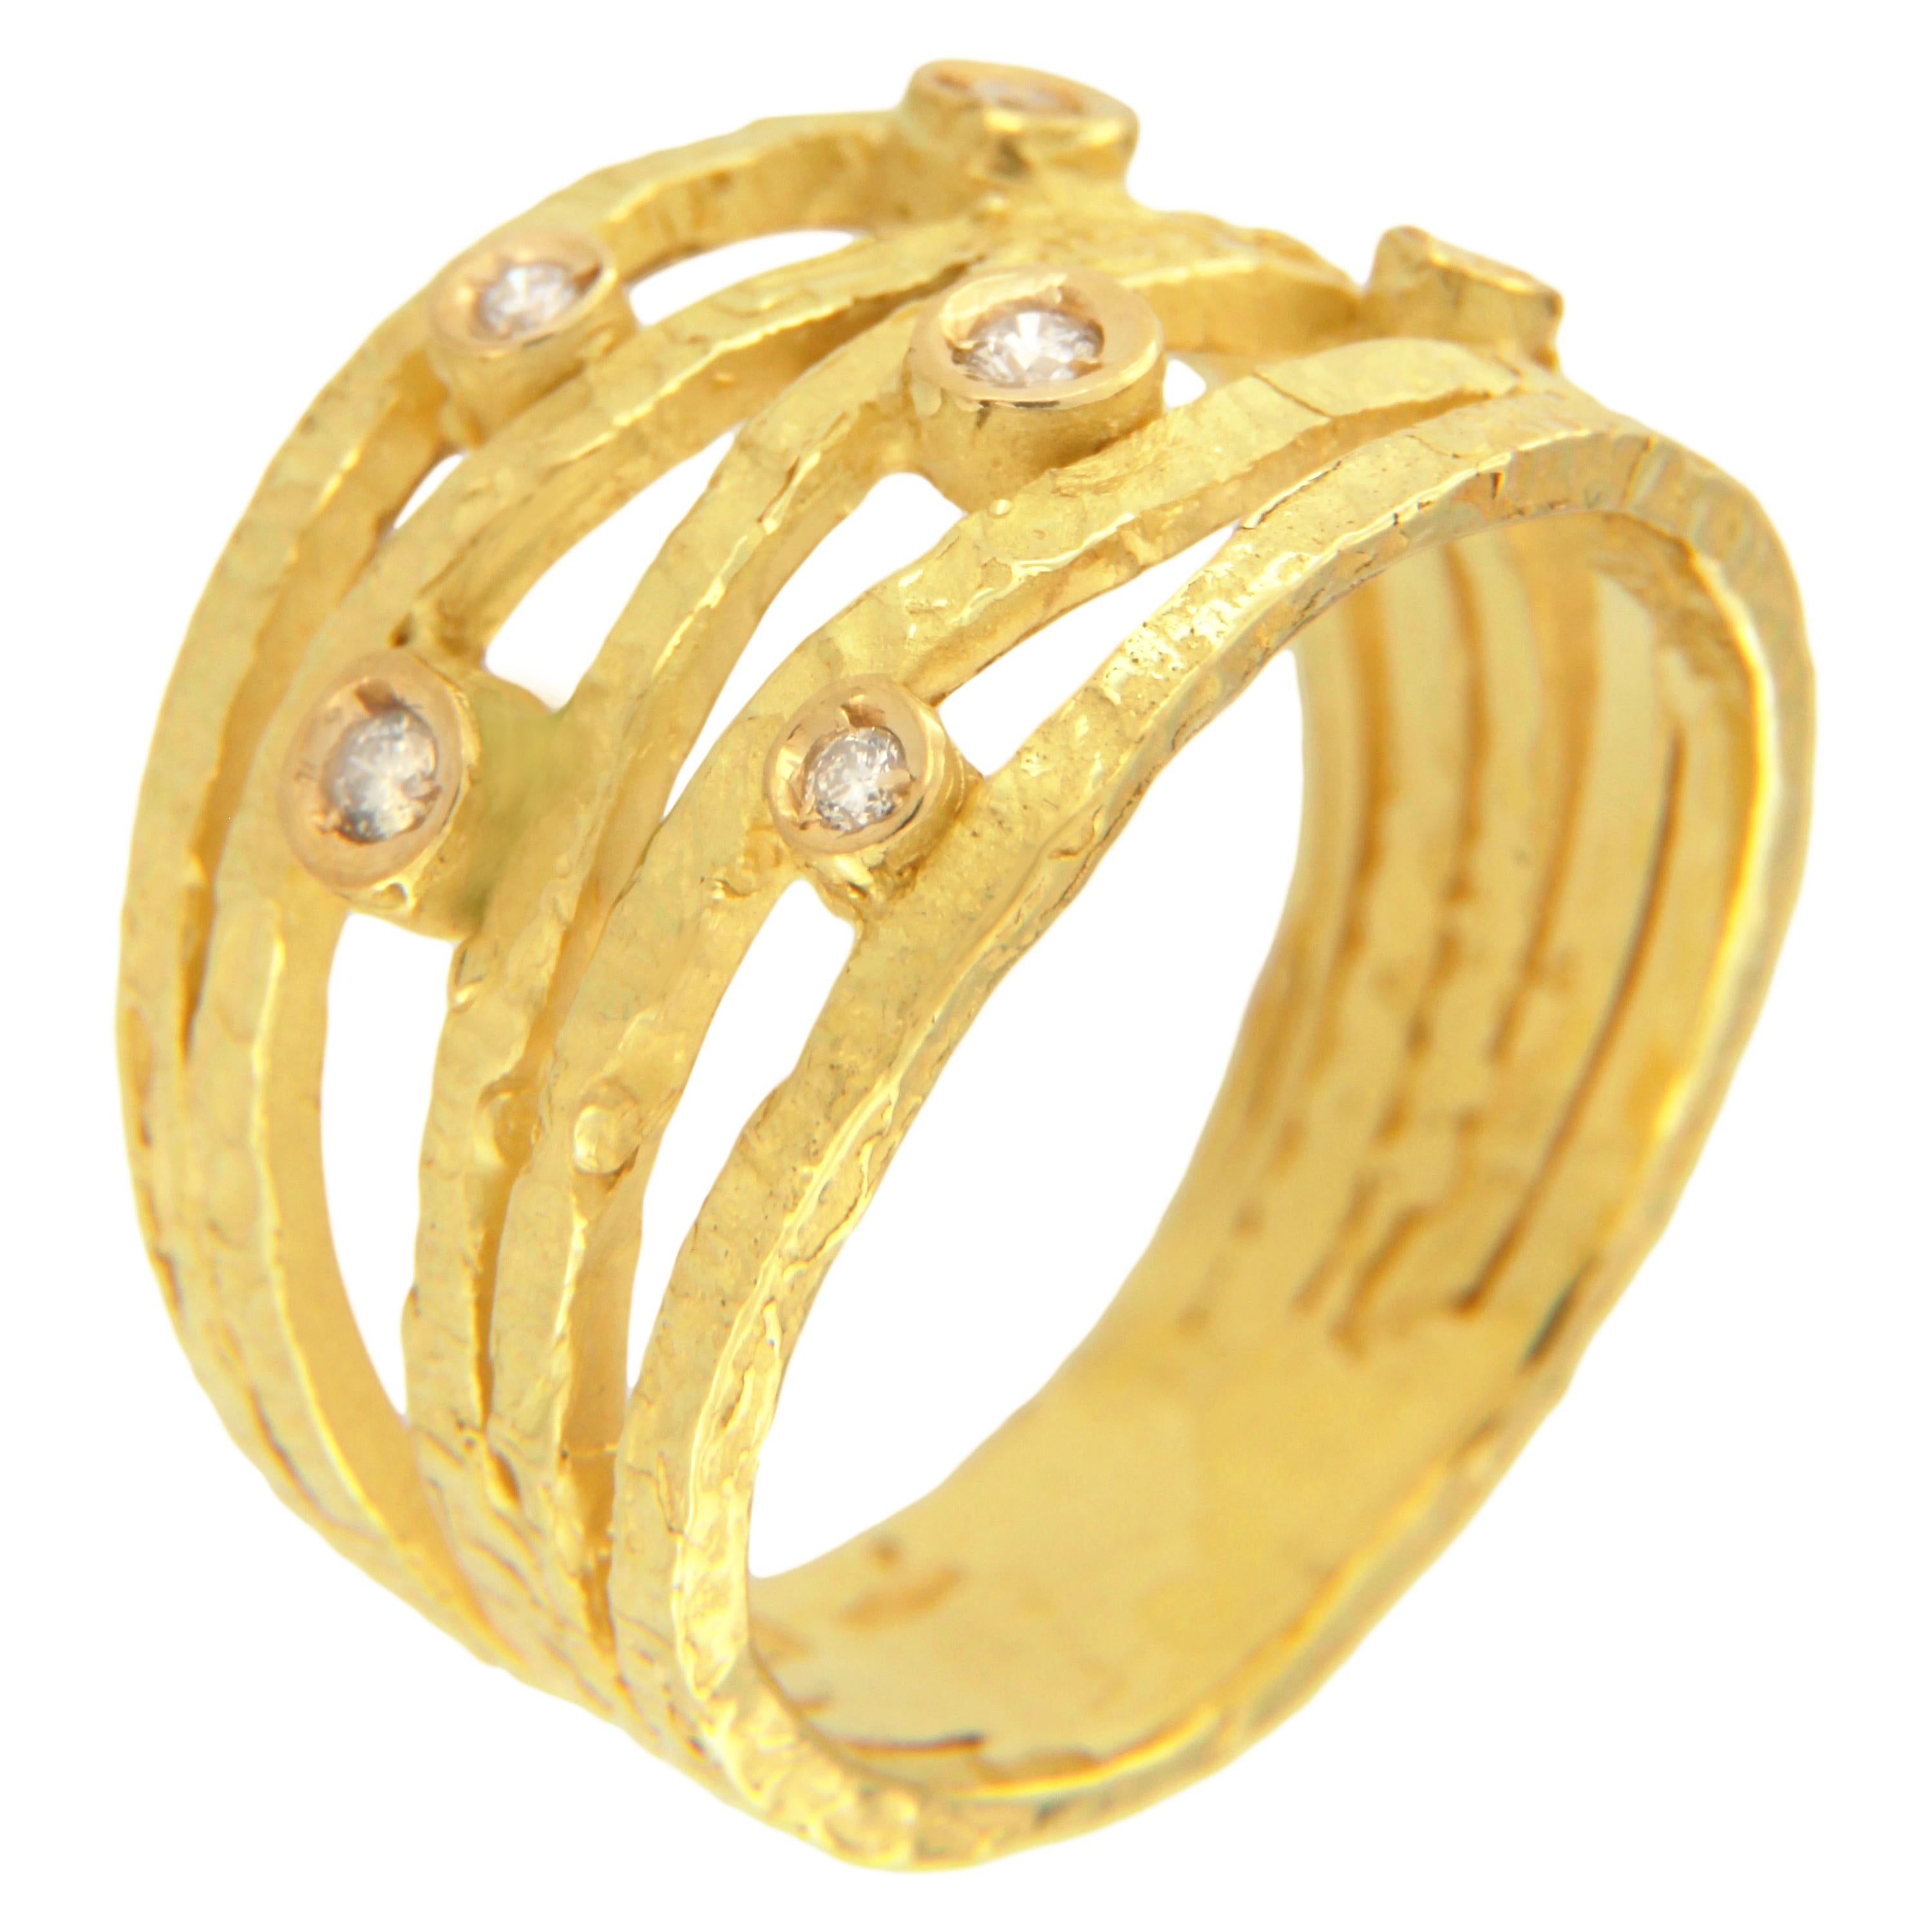 Lovely Satin Yellow Gold Wire Band Ring, from Sacchi’s 